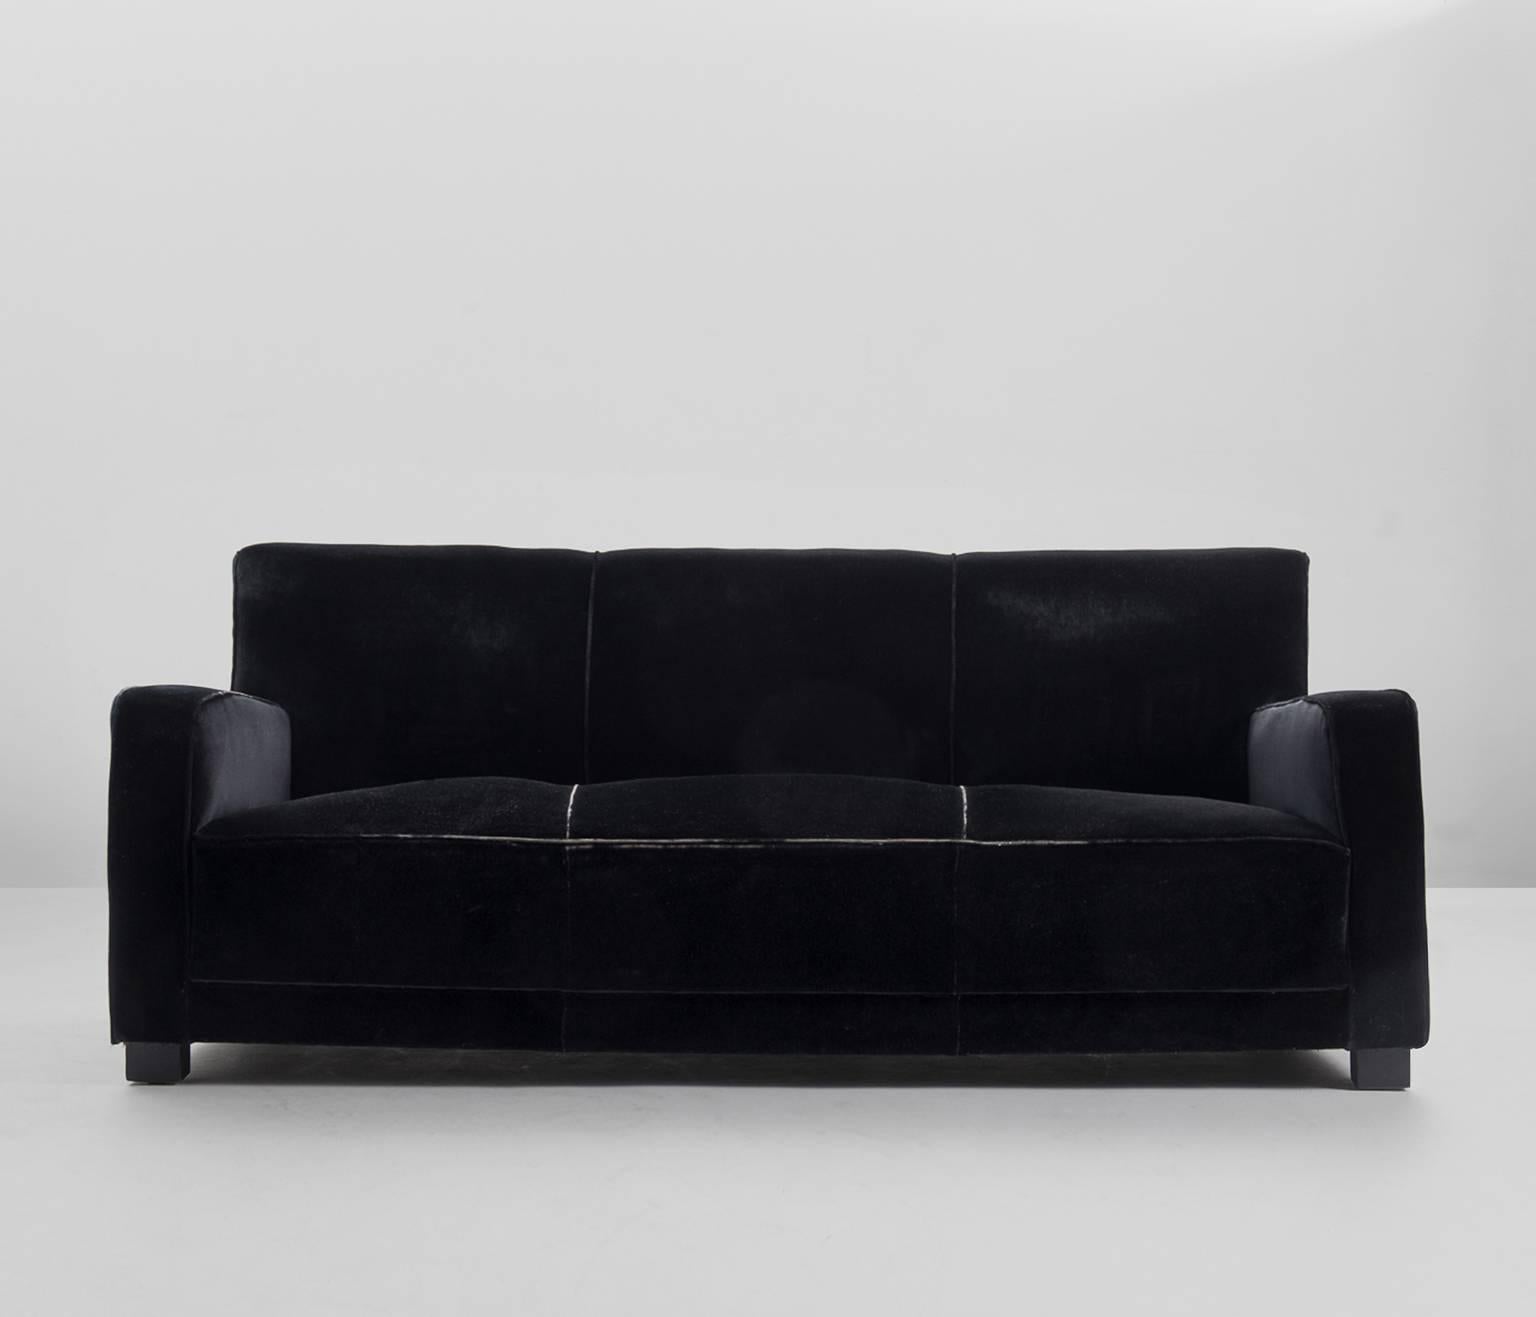 Large three seater sofa.

The back and the seat consists of two one part. The armrests are elegantly shaped. The legs are made from dark stained wood.

The sofa show very elegant lines.
Currently upholstered in original black velvet fabric,